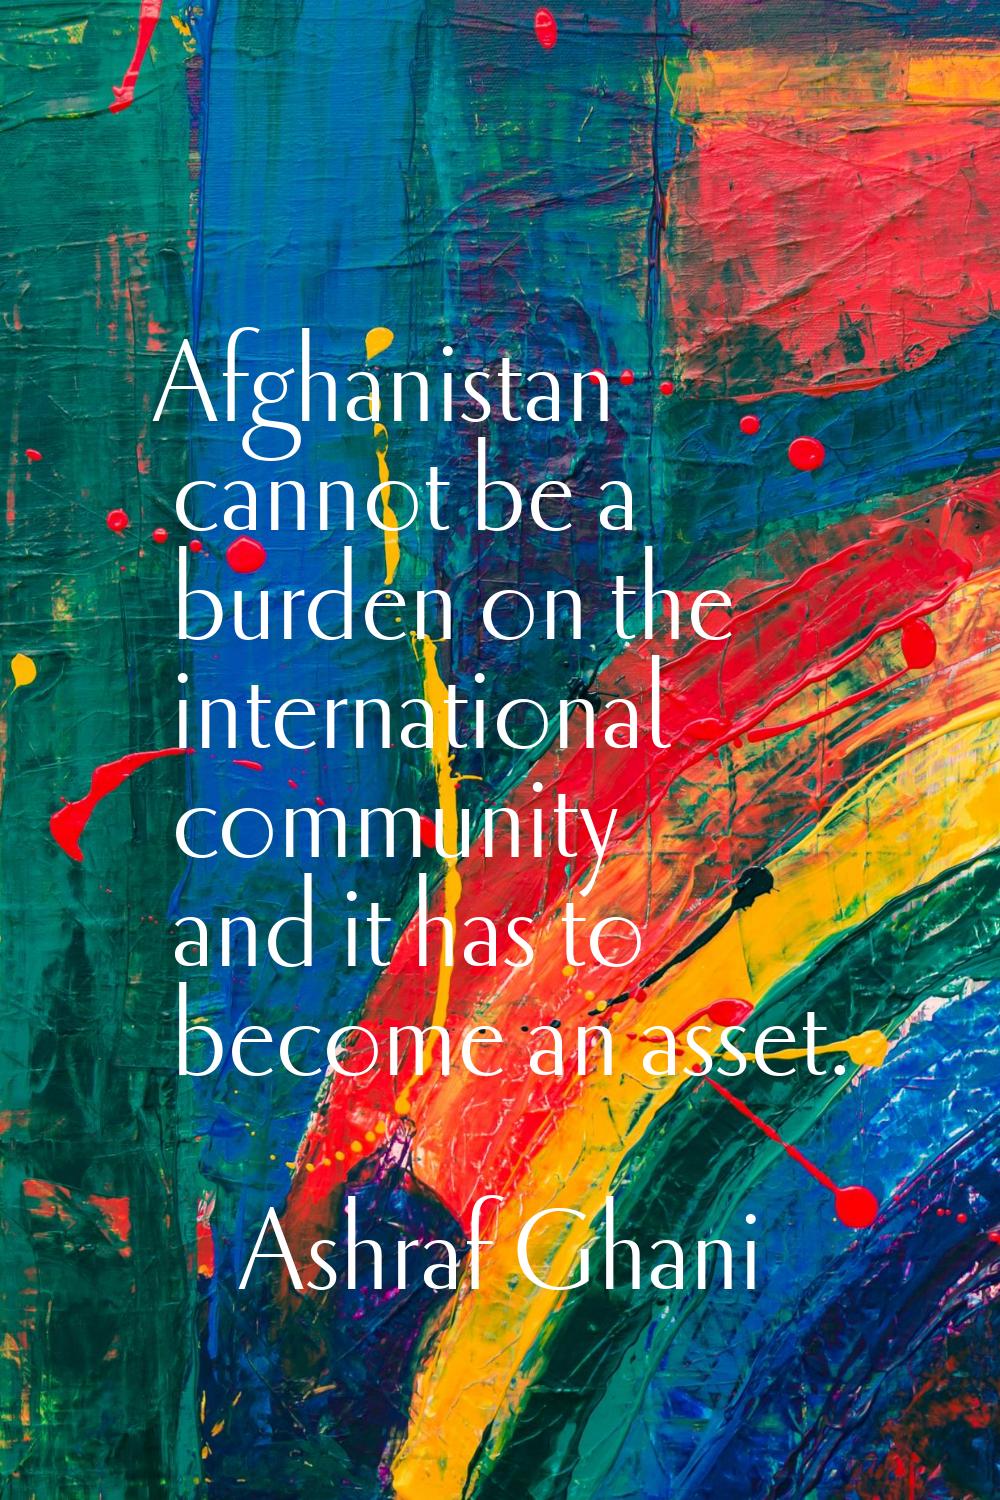 Afghanistan cannot be a burden on the international community and it has to become an asset.